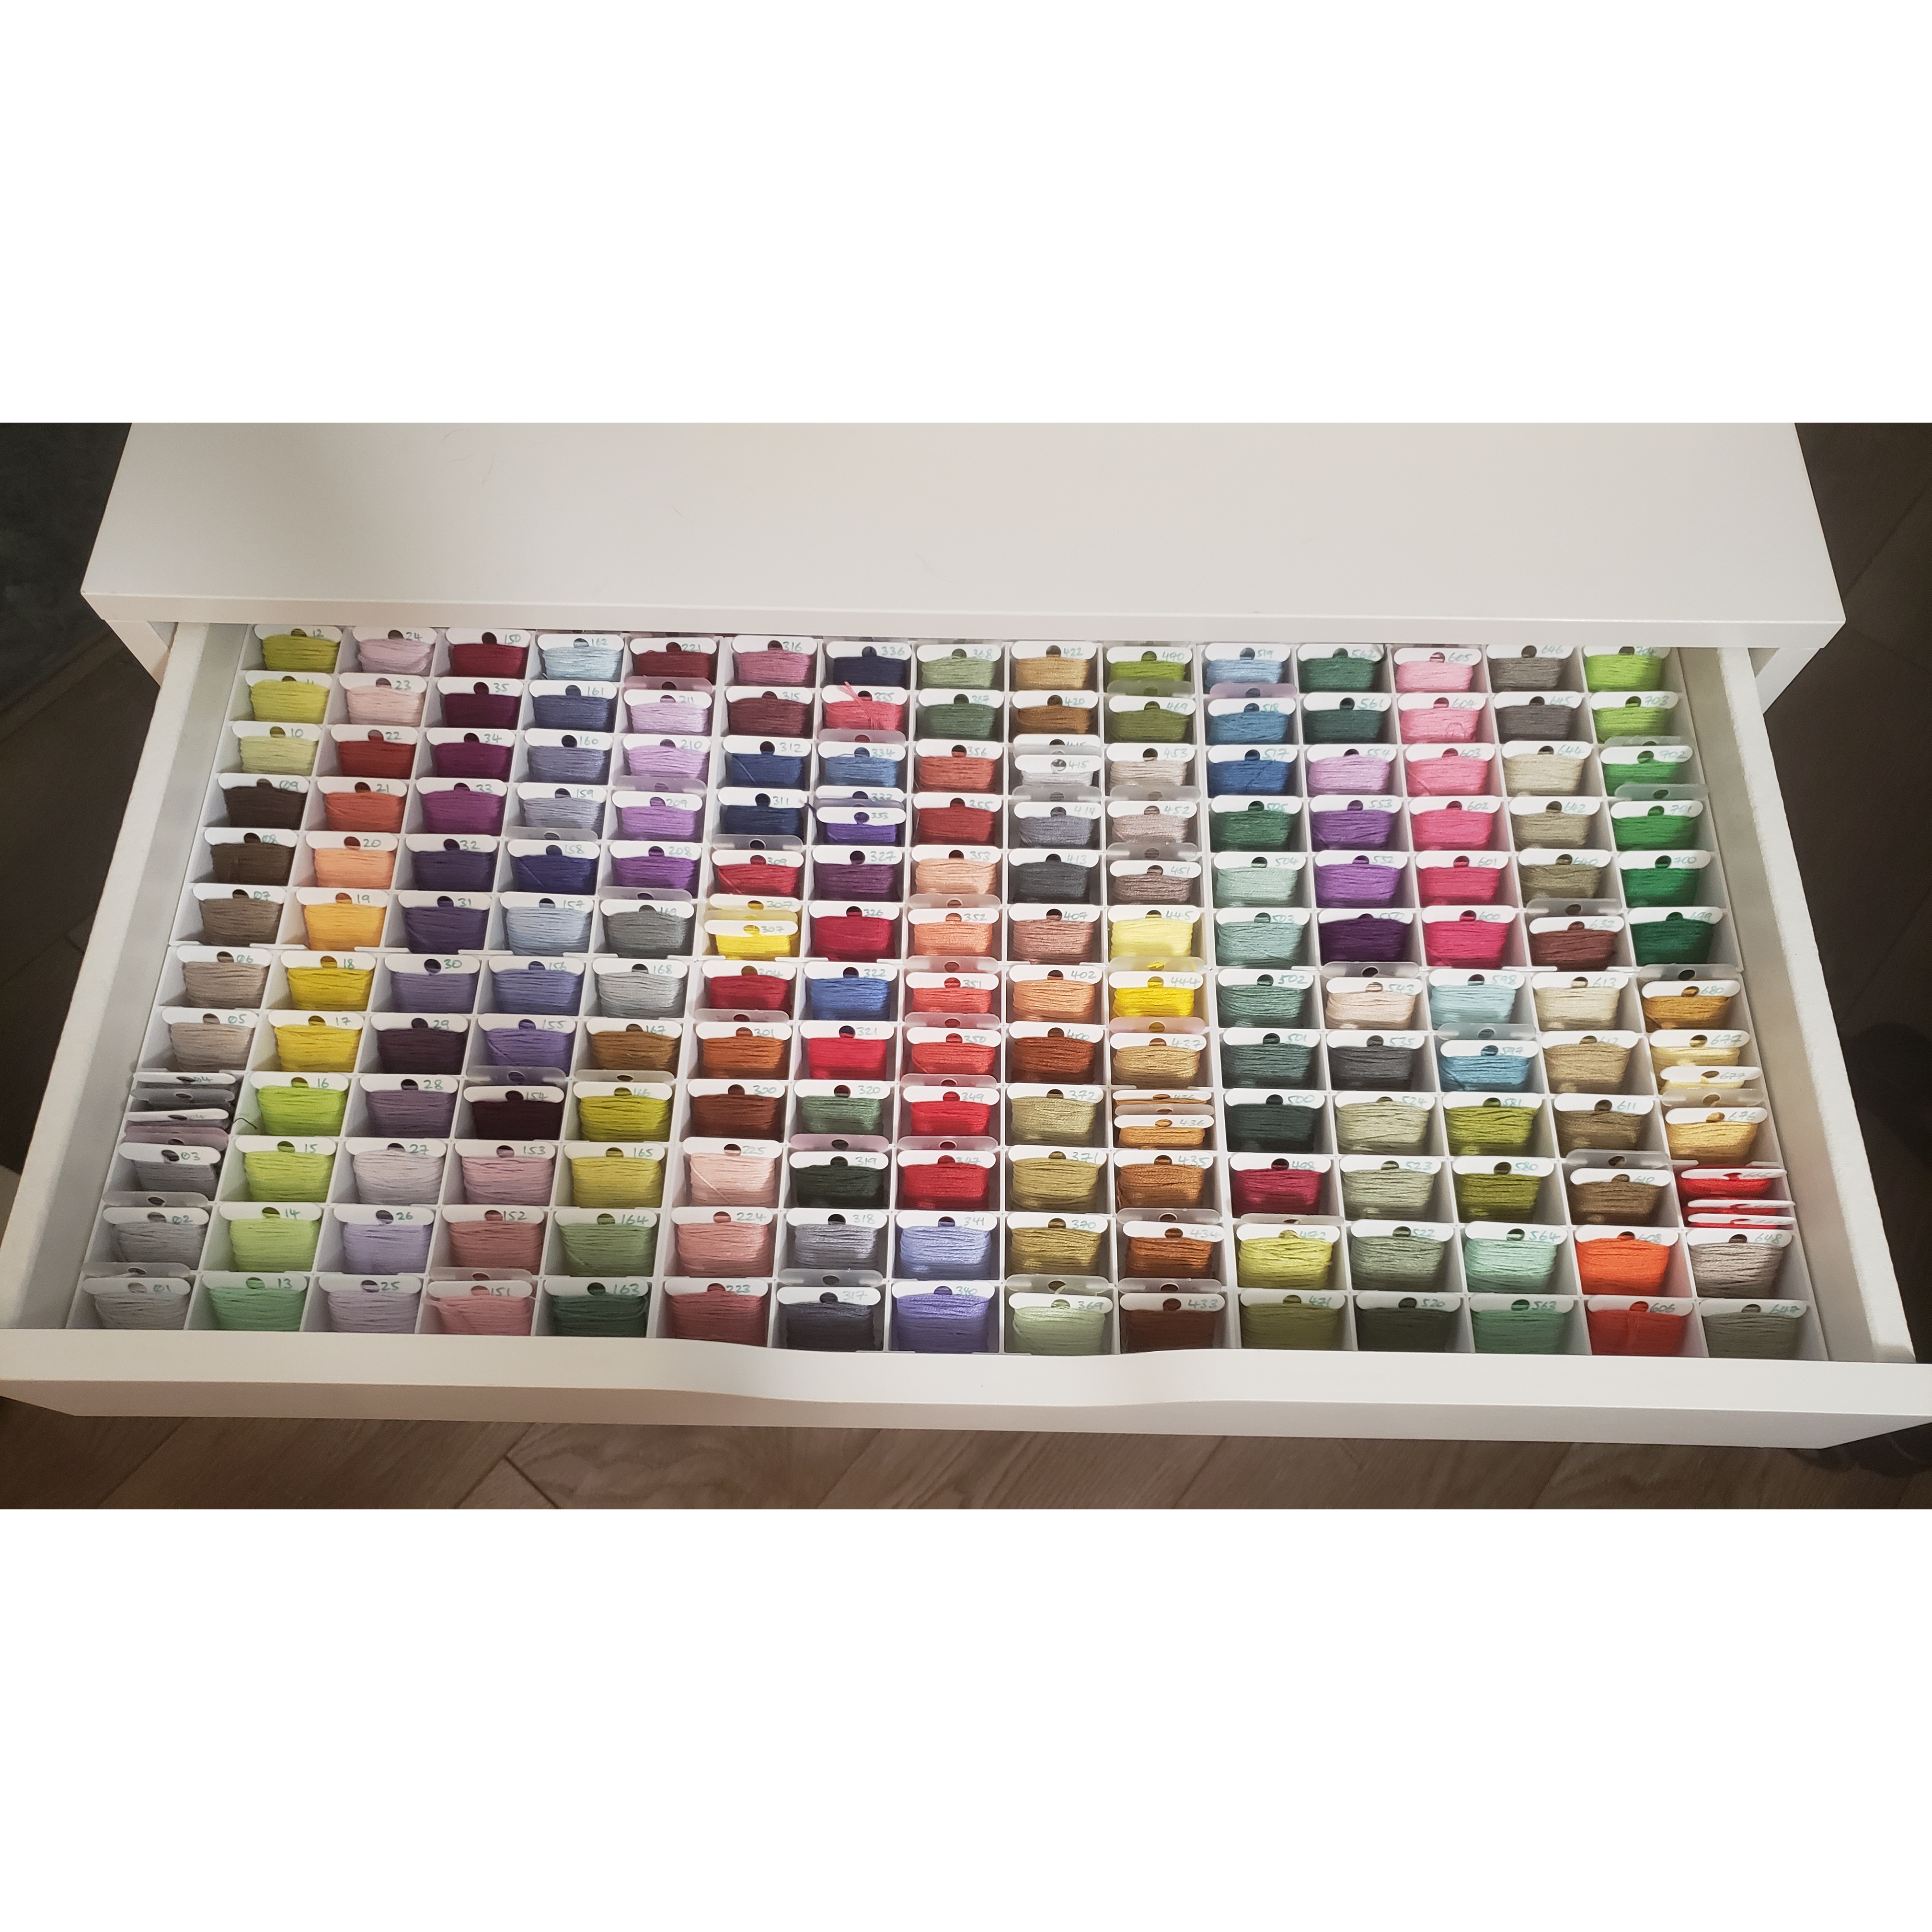 Embroidery Floss Organizers for IKEA Alex Drawers